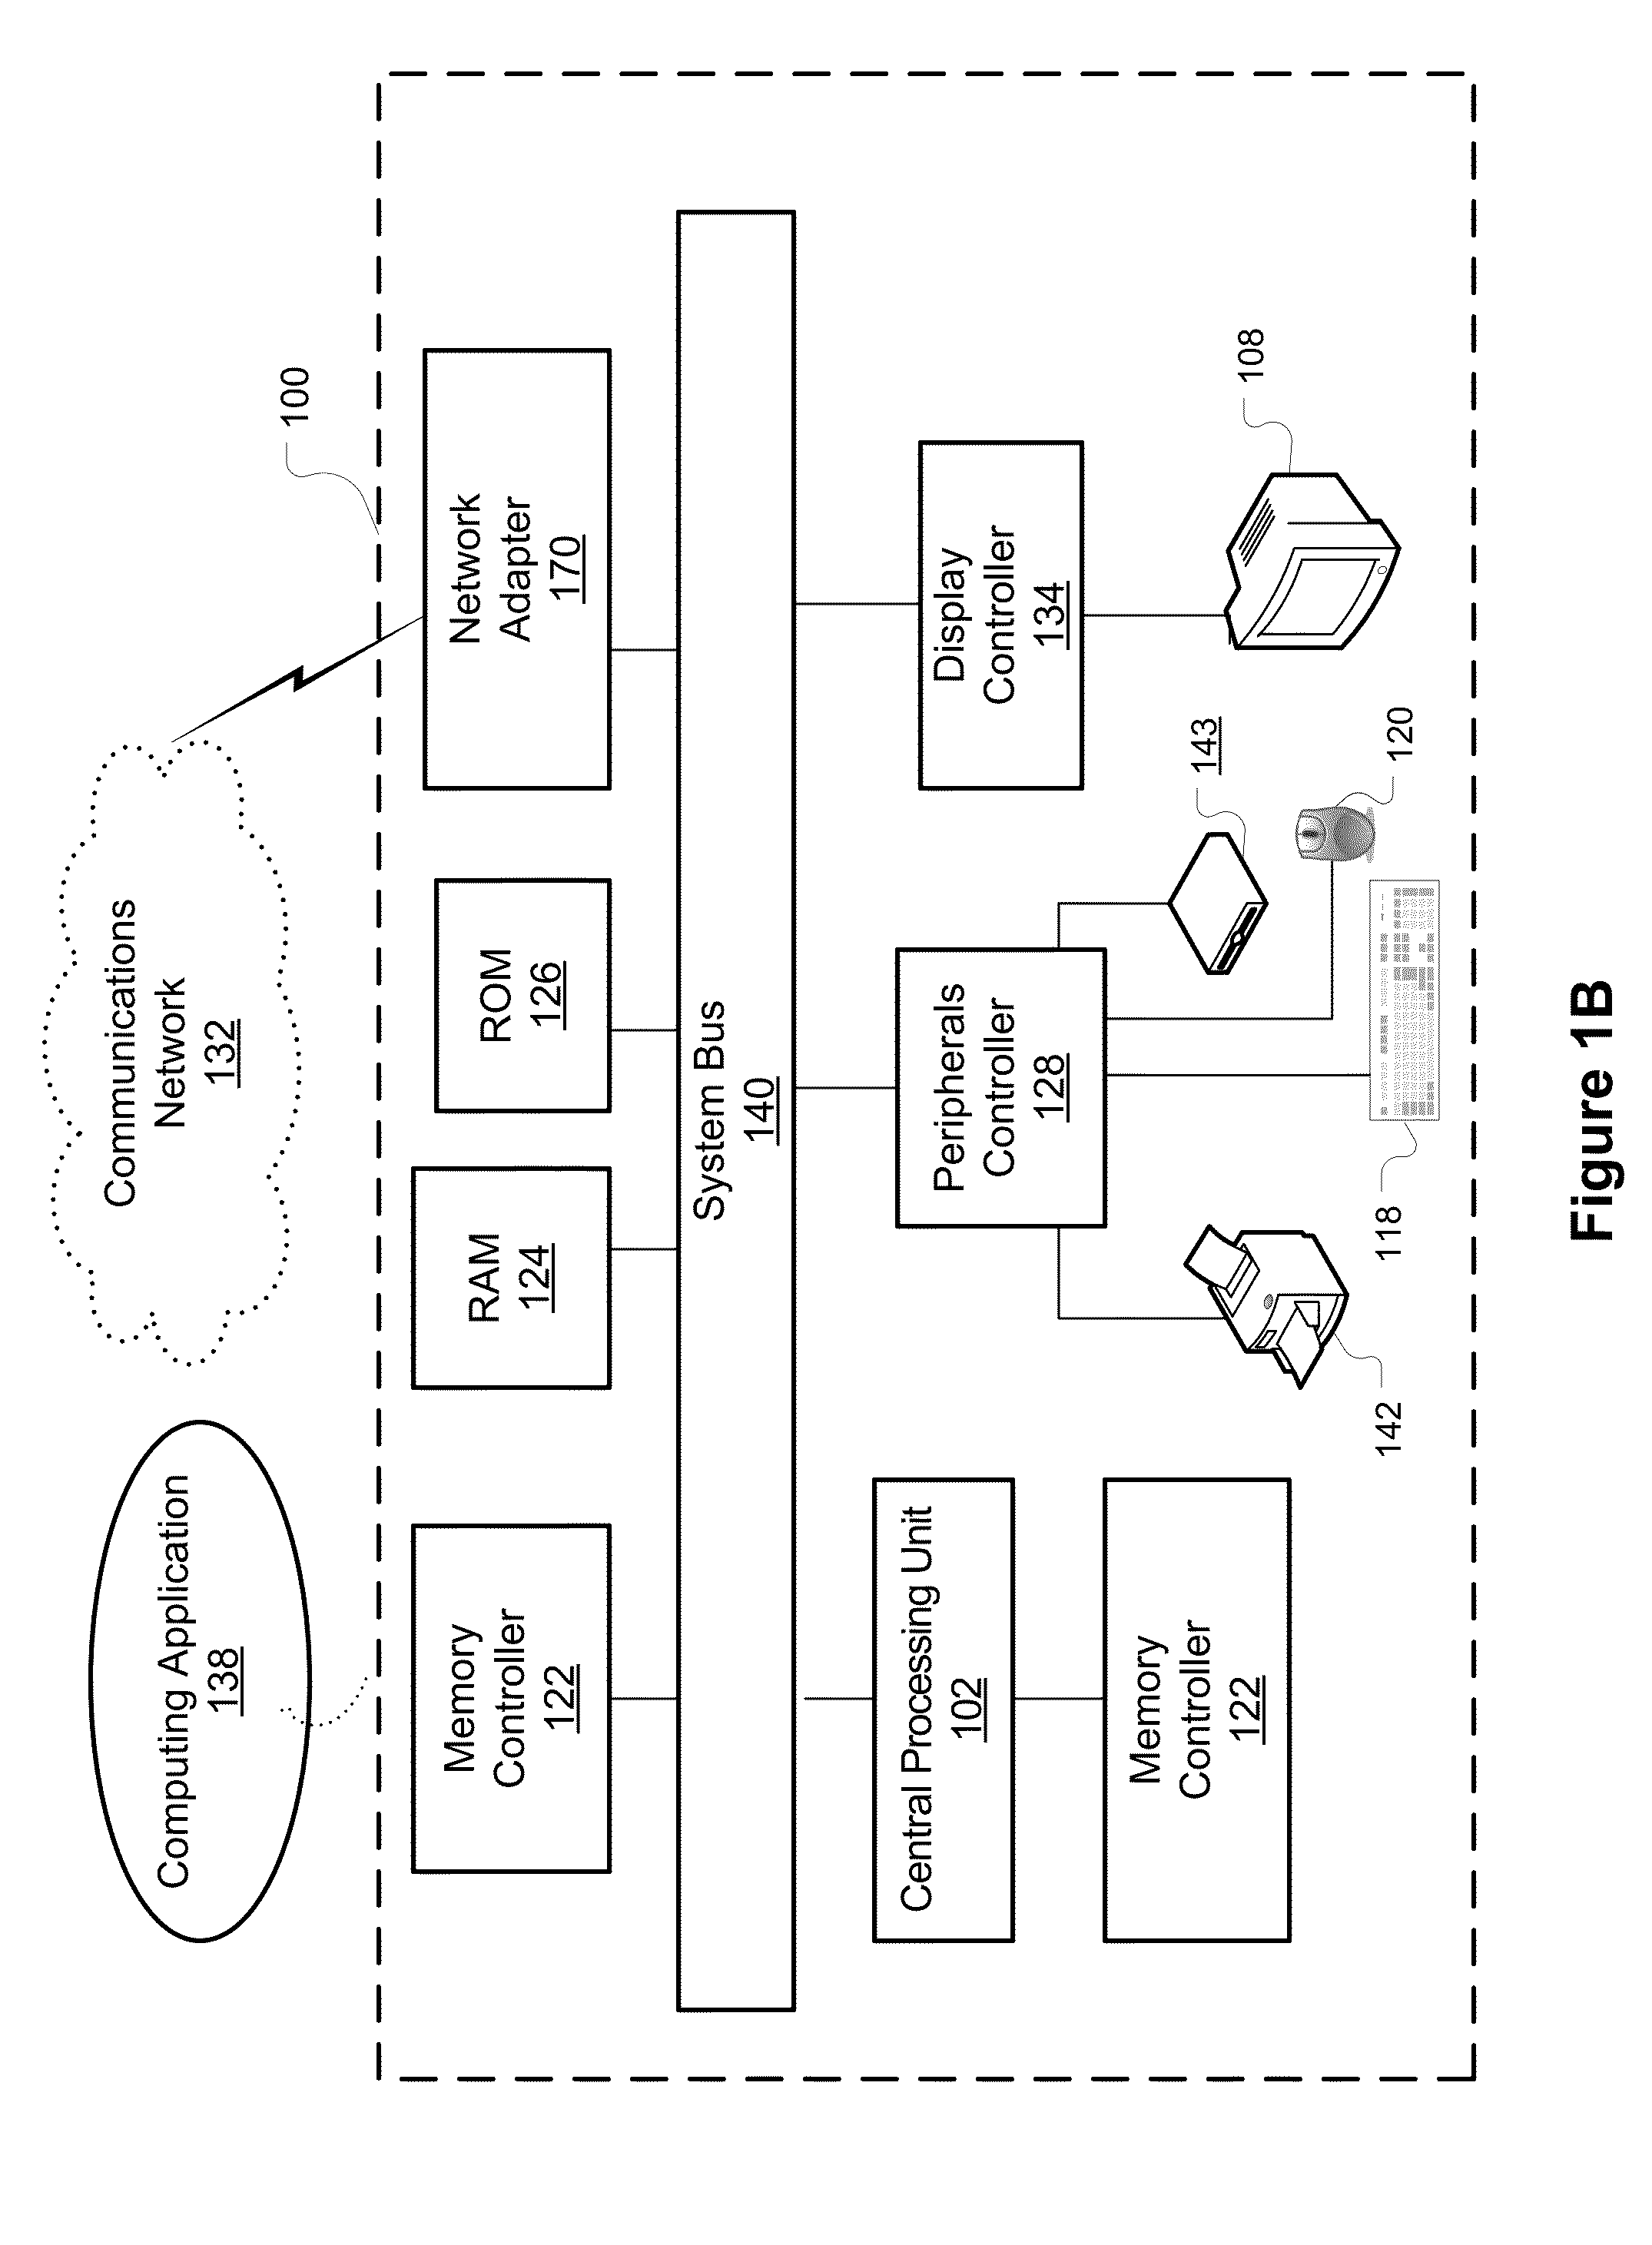 System and Method for Targeting Specific Benefits with Cognitive Training